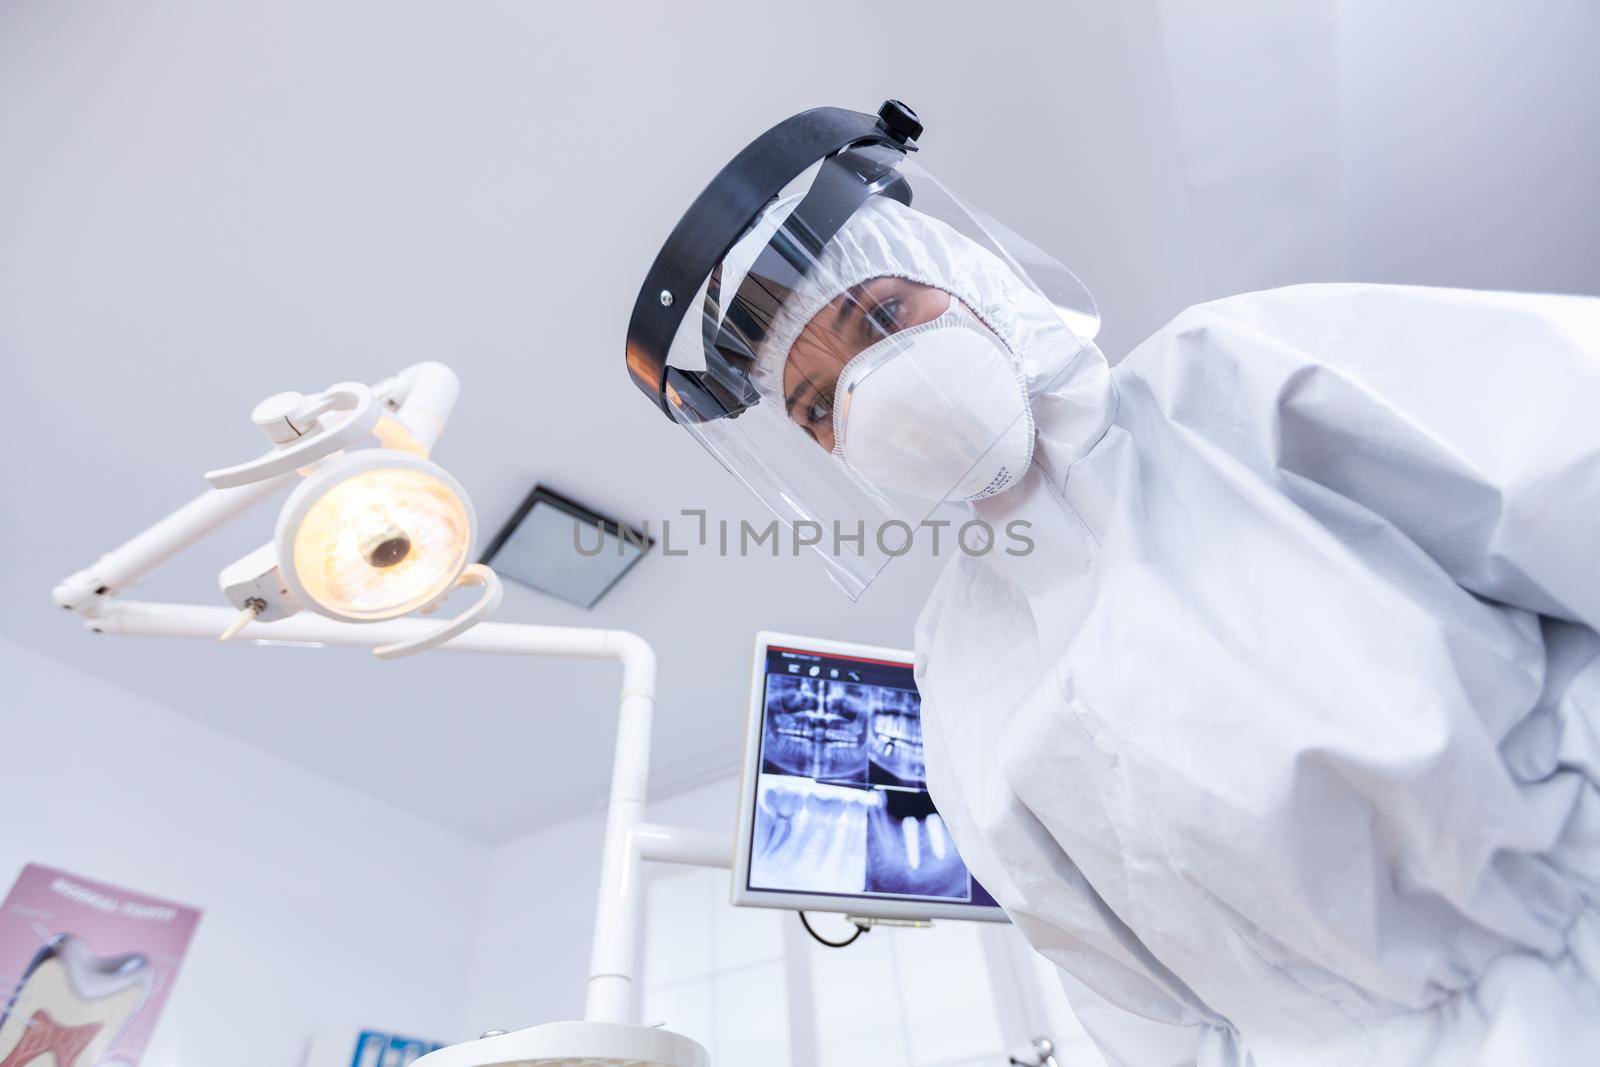 Dentist point of view wearing protection gear against covid outbreak by DCStudio